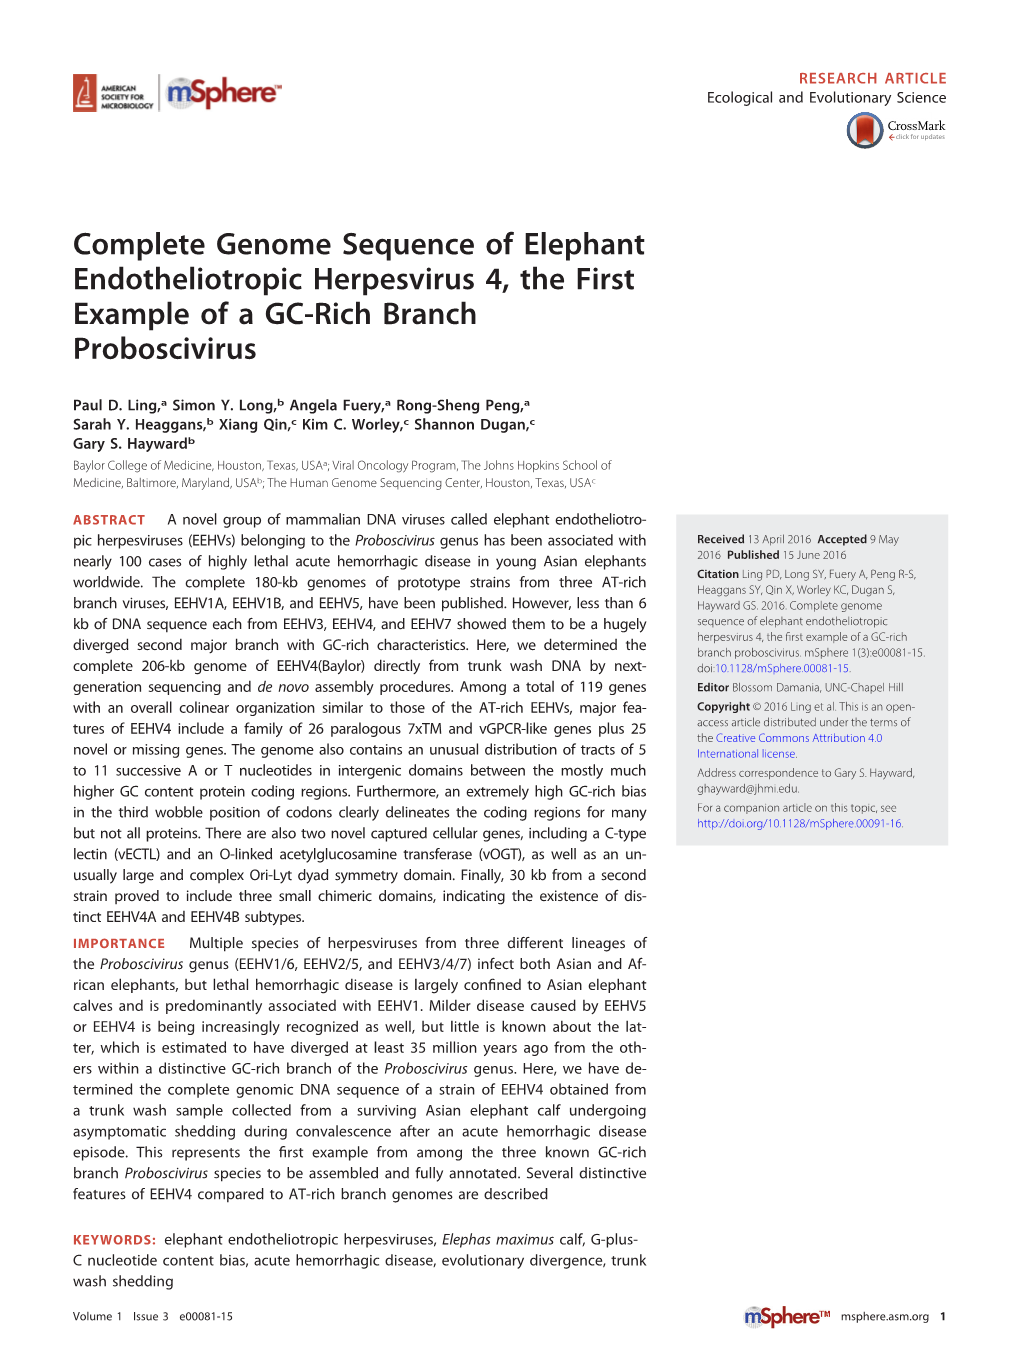 Complete Genome Sequence of Elephant Endotheliotropic Herpesvirus 4, the First Example of a GC-Rich Branch Proboscivirus